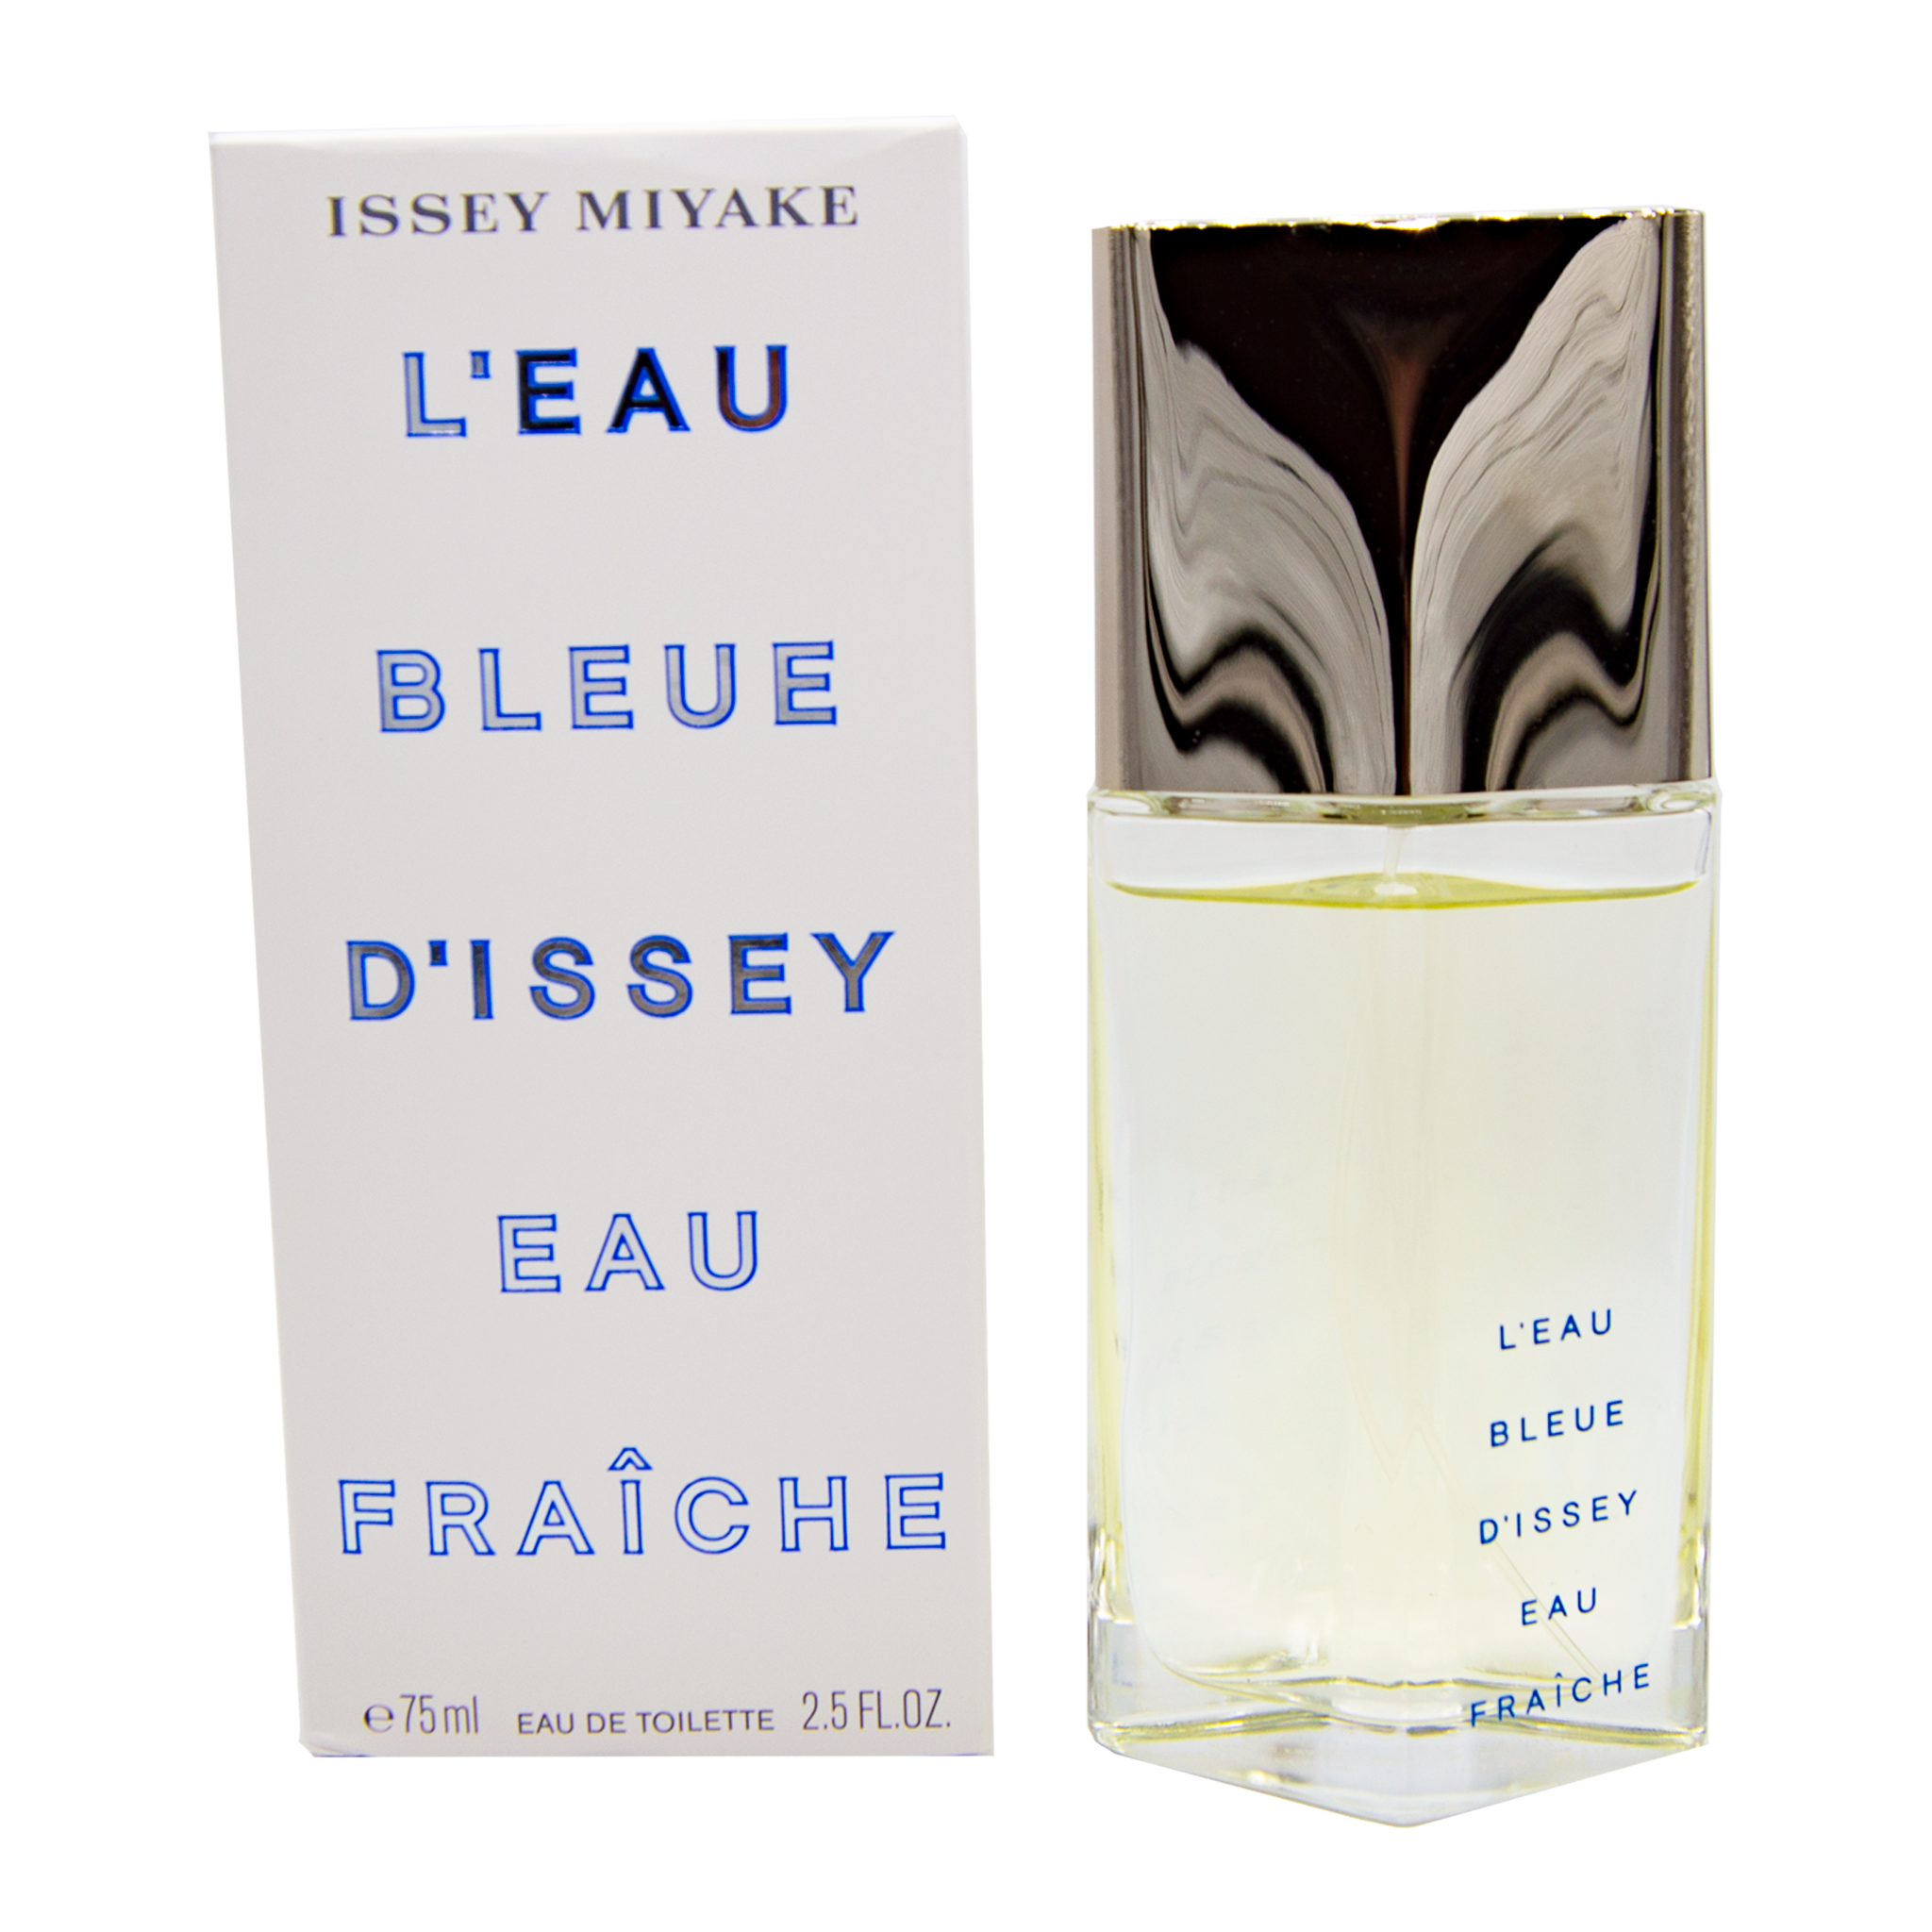 L'eau D'issey (issey Miyake) Cologne by Issey Miyake